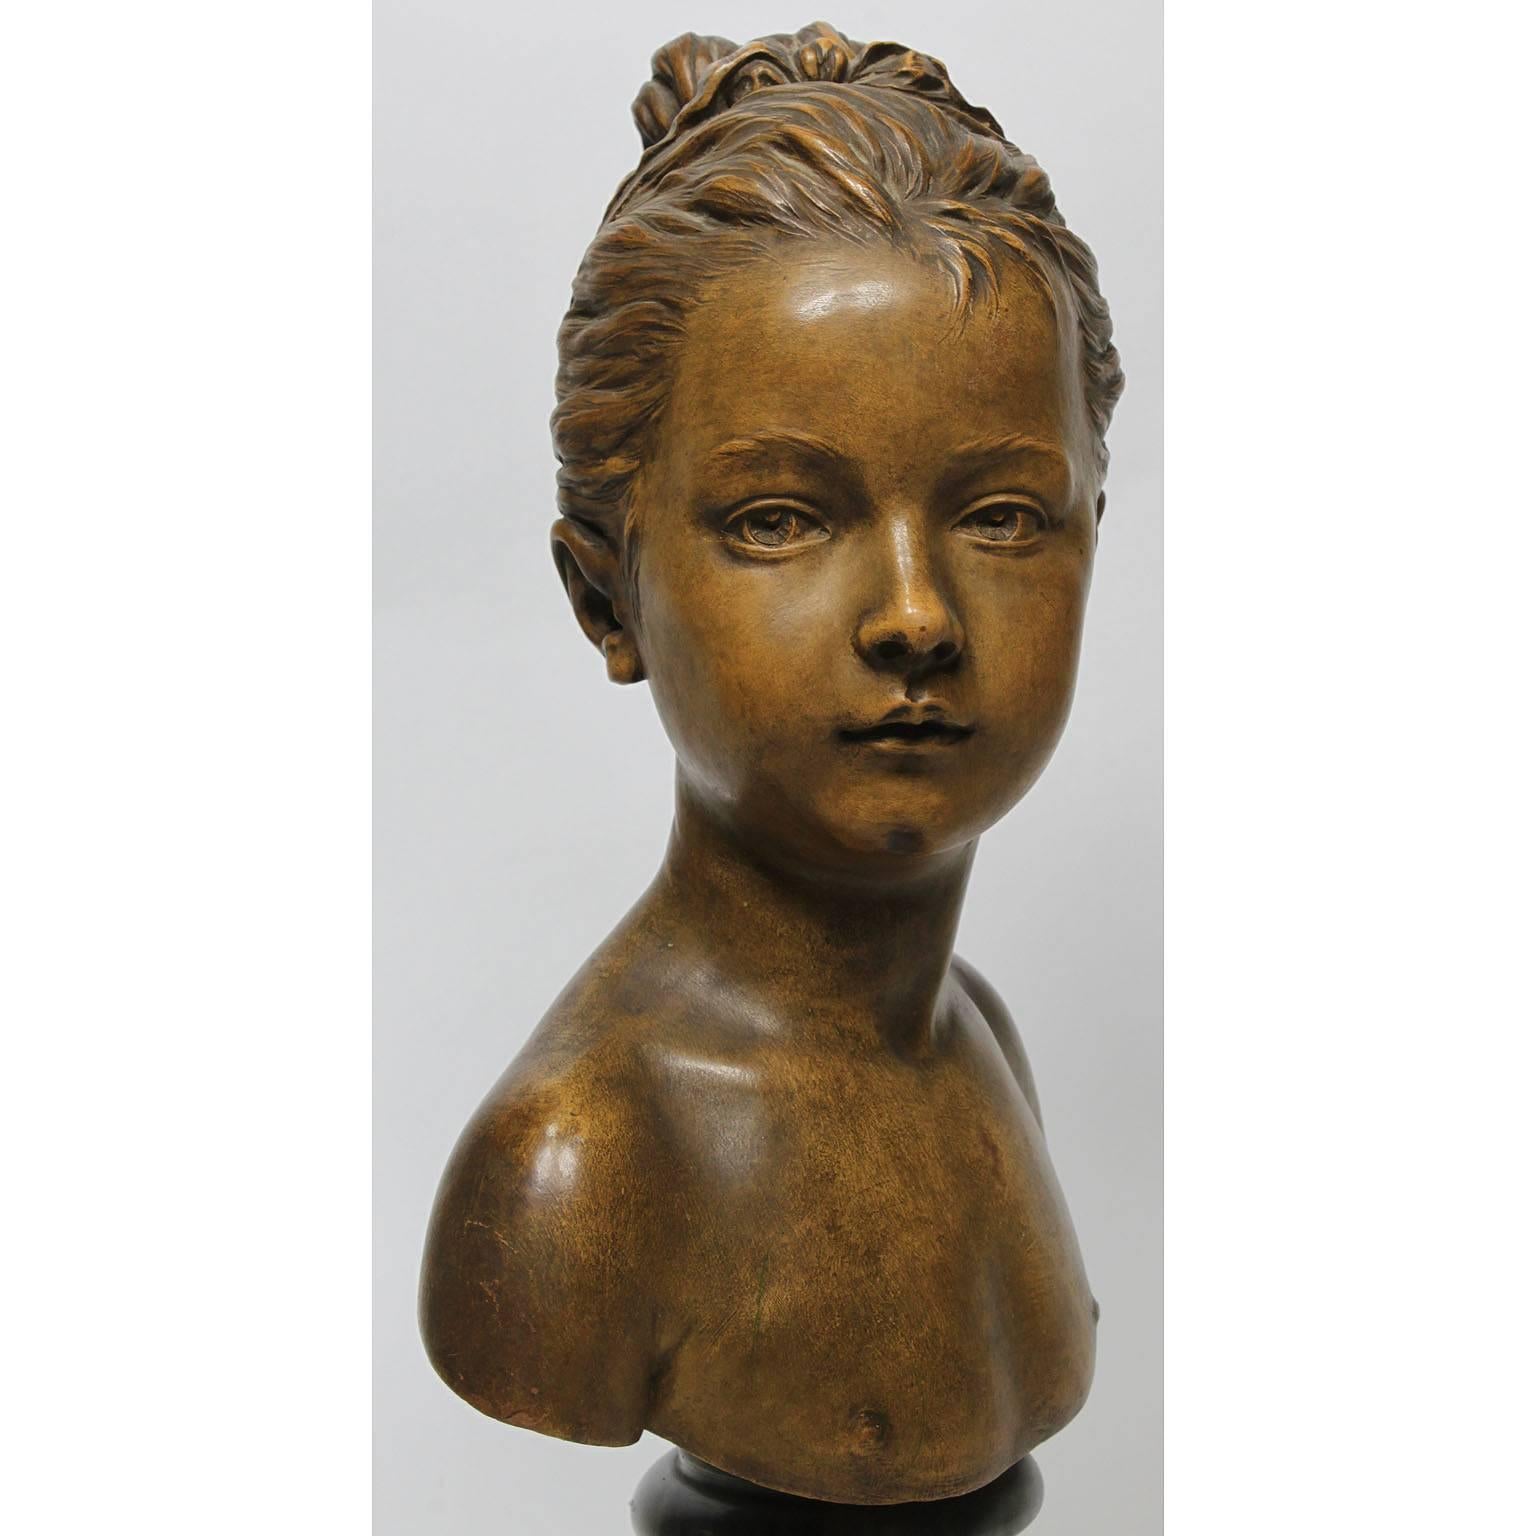 A very fine French 19th century terracotta bust of and Infant Louise Brongniart after Jean-Antoine Houdon (French 1741-1828) raised on a later Blue Turquin marble plinth, Paris, circa 1880.

Among the numerous busts Houdon showed at the Salon of